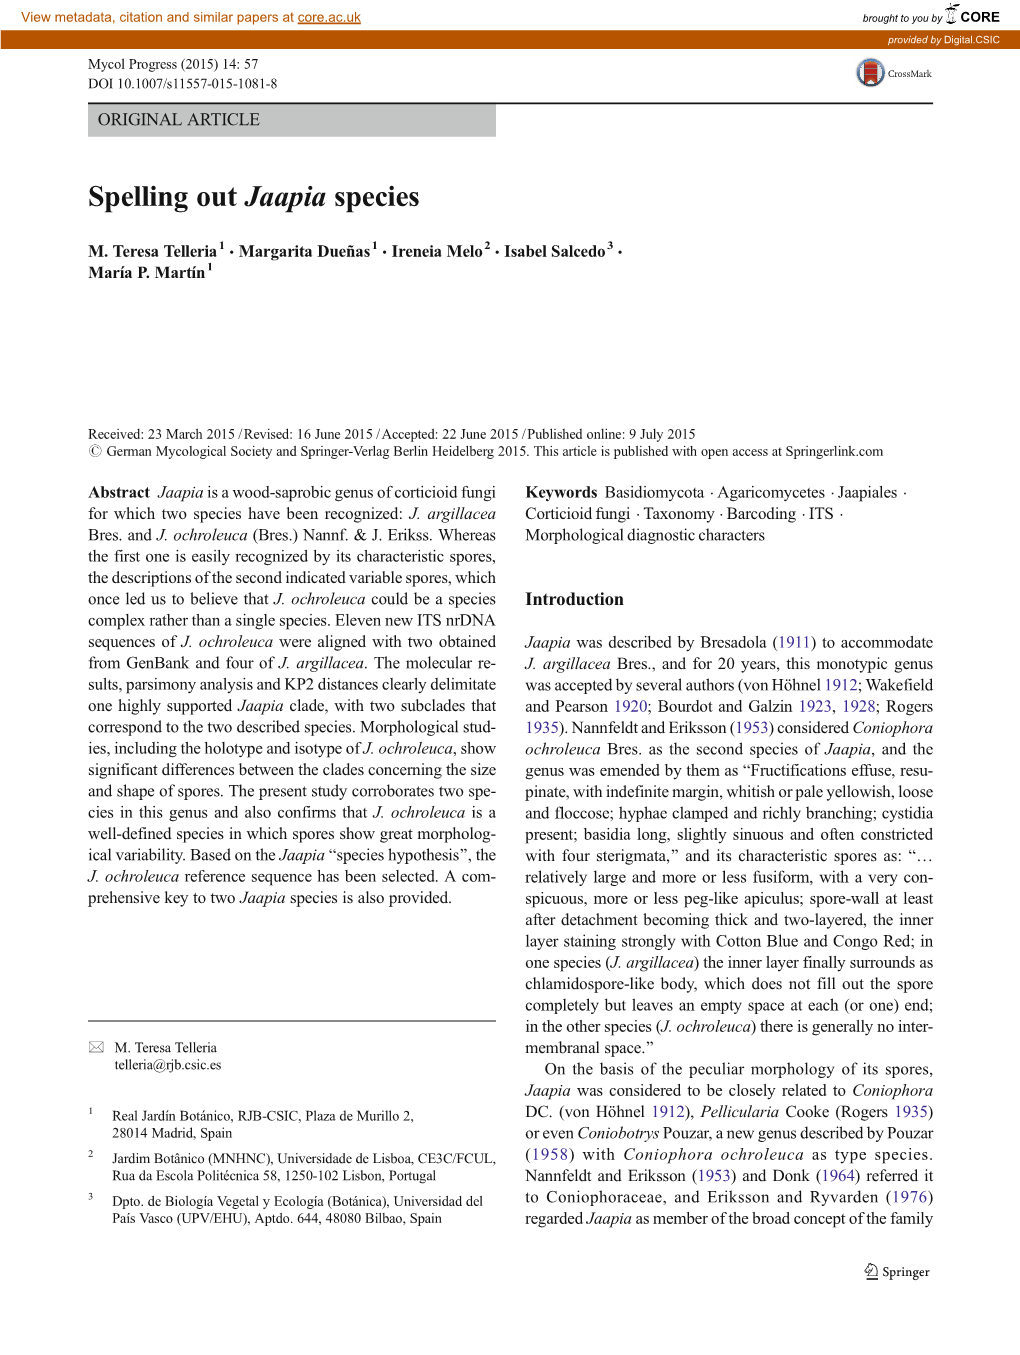 Spelling out Jaapia Species